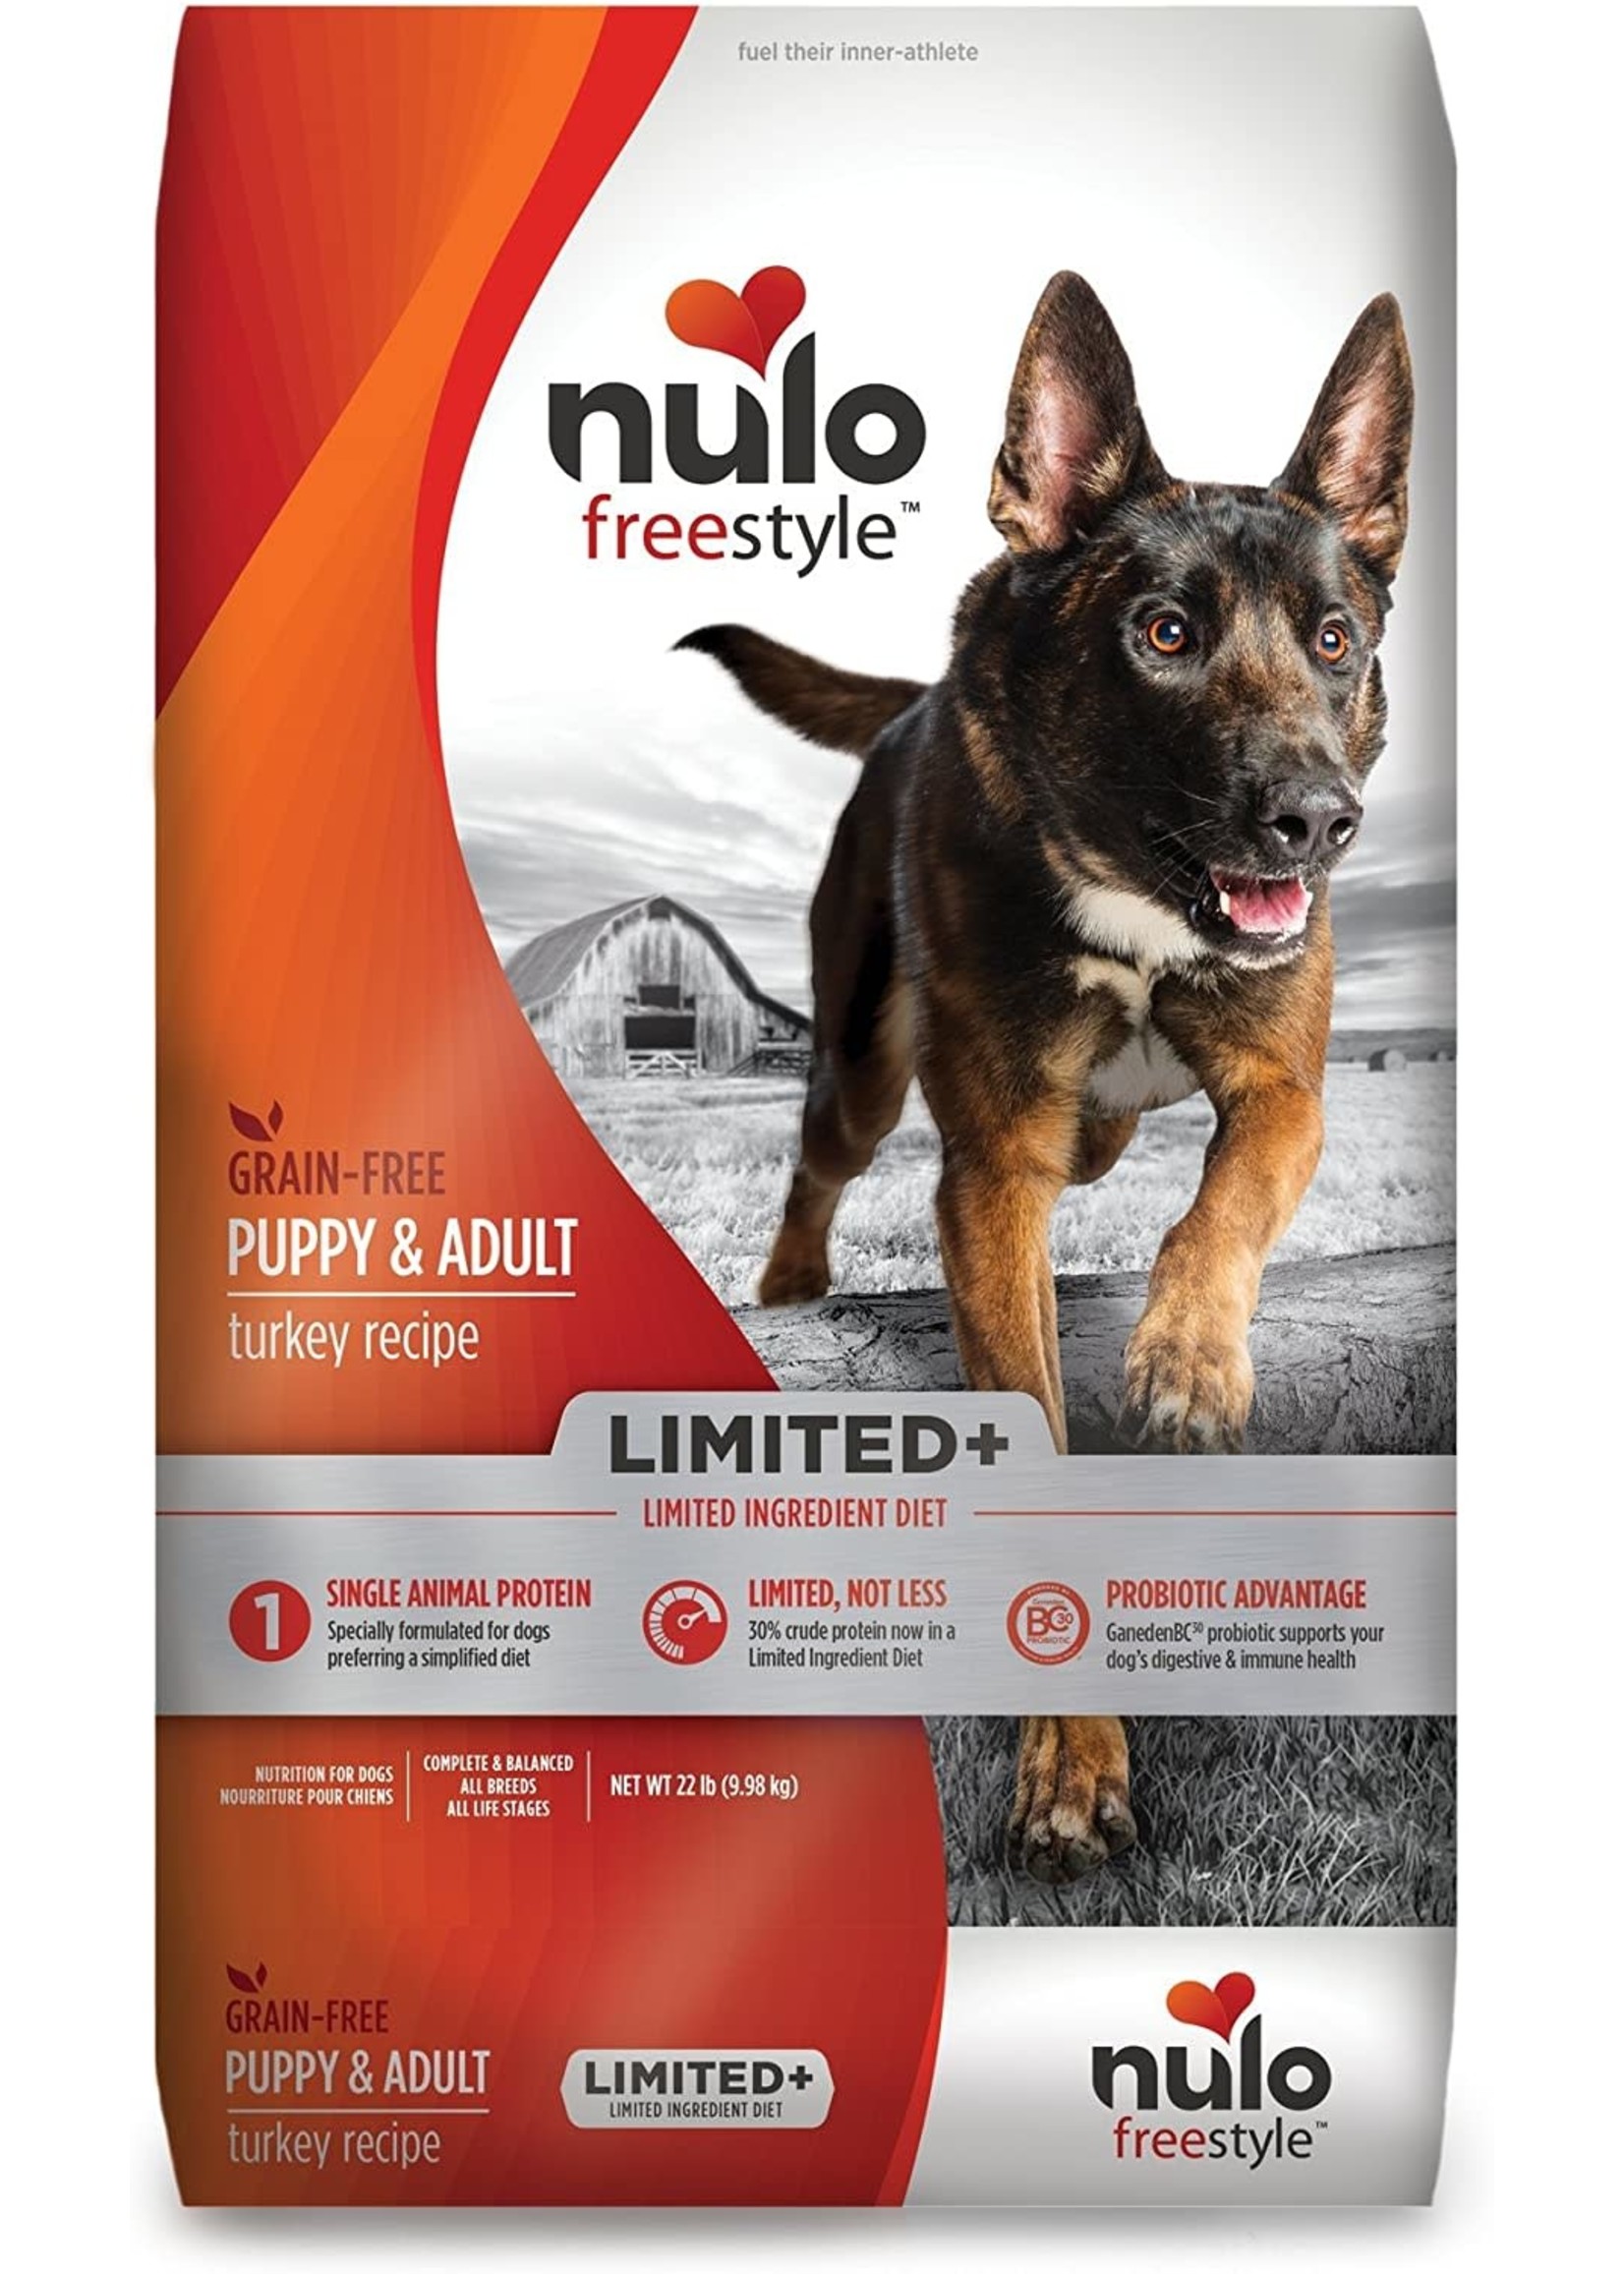 Nulo Freestyle Grain Free Limited+ Turkey Recipe - Puppy & Adult Dry Dog Food 22 lbs